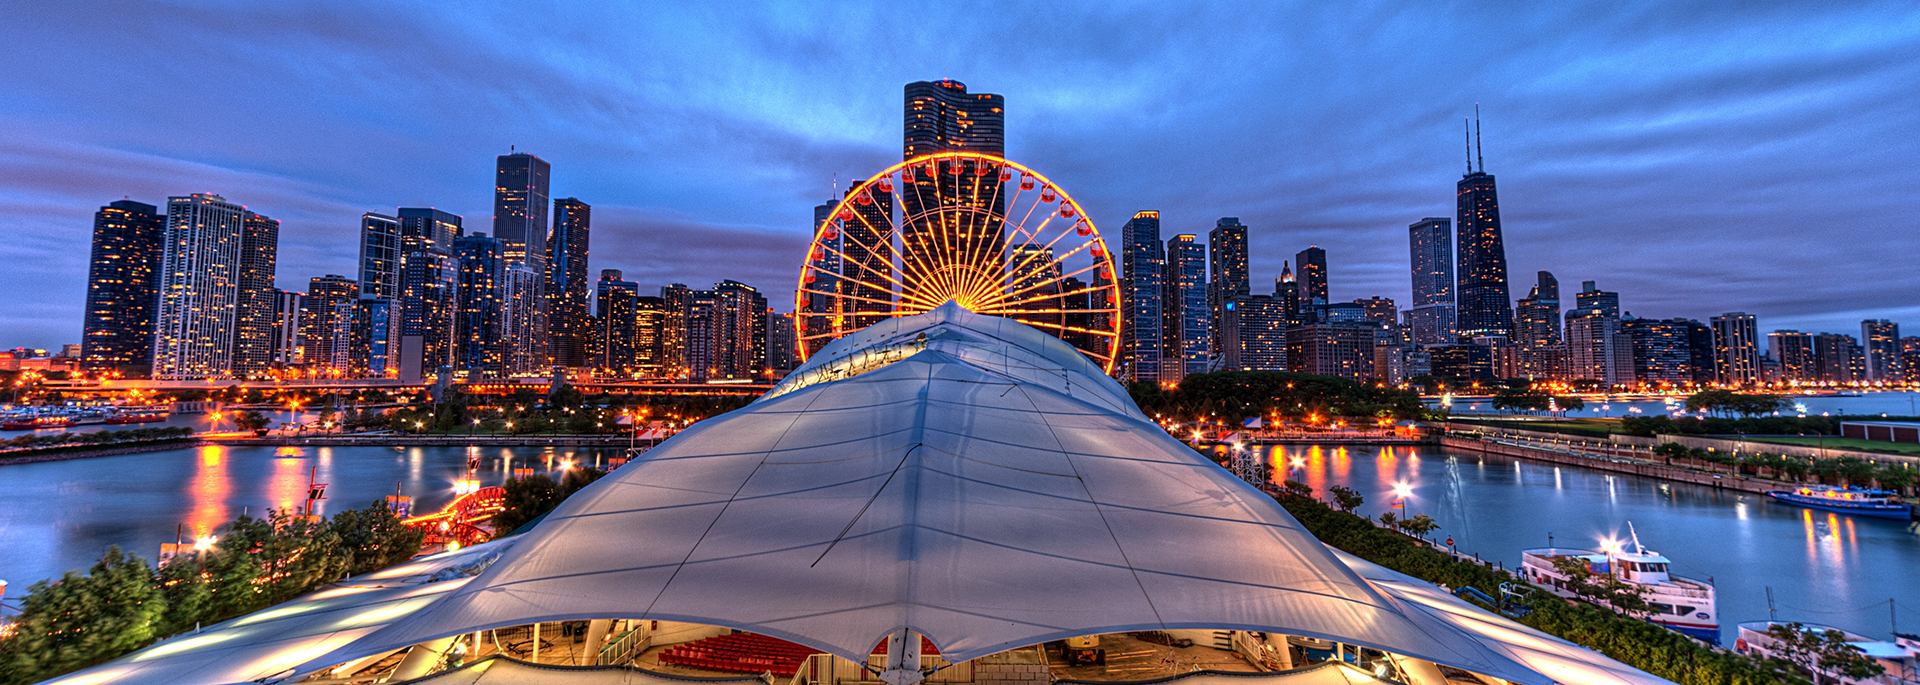 view of chicago skyline with ferris wheel in foreground